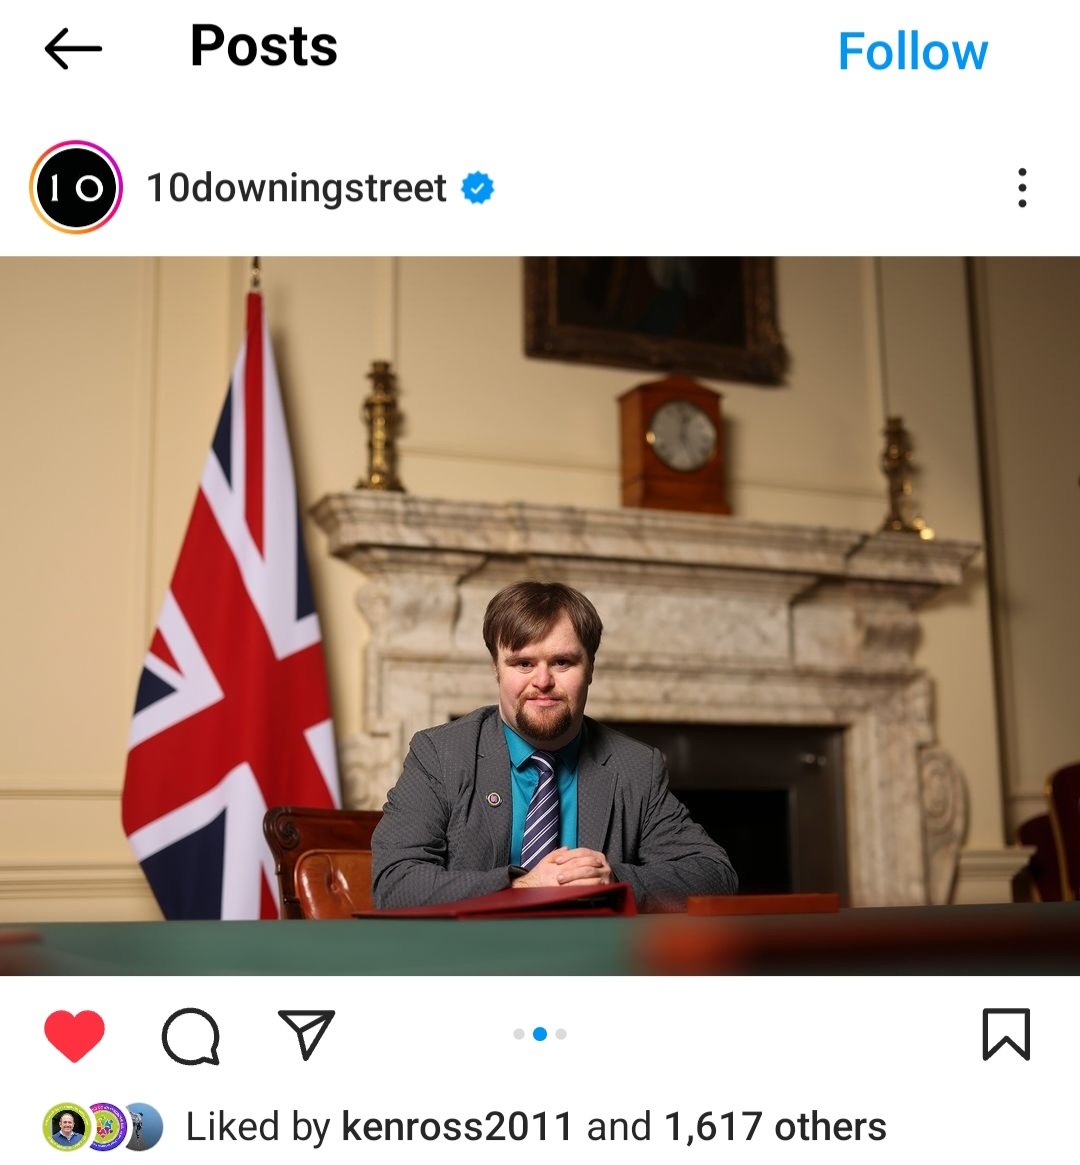 What did you do for #WorldDownSyndromeDay? For this shoot, the gov't photographers had Fionn sit in the Prime Minister's chair in the Cabinet Room, the very one used by all UK PMs. Rarely does anyone who's not a PM perch in it. He looks pretty comfortable there. @NDSPolicyGroup